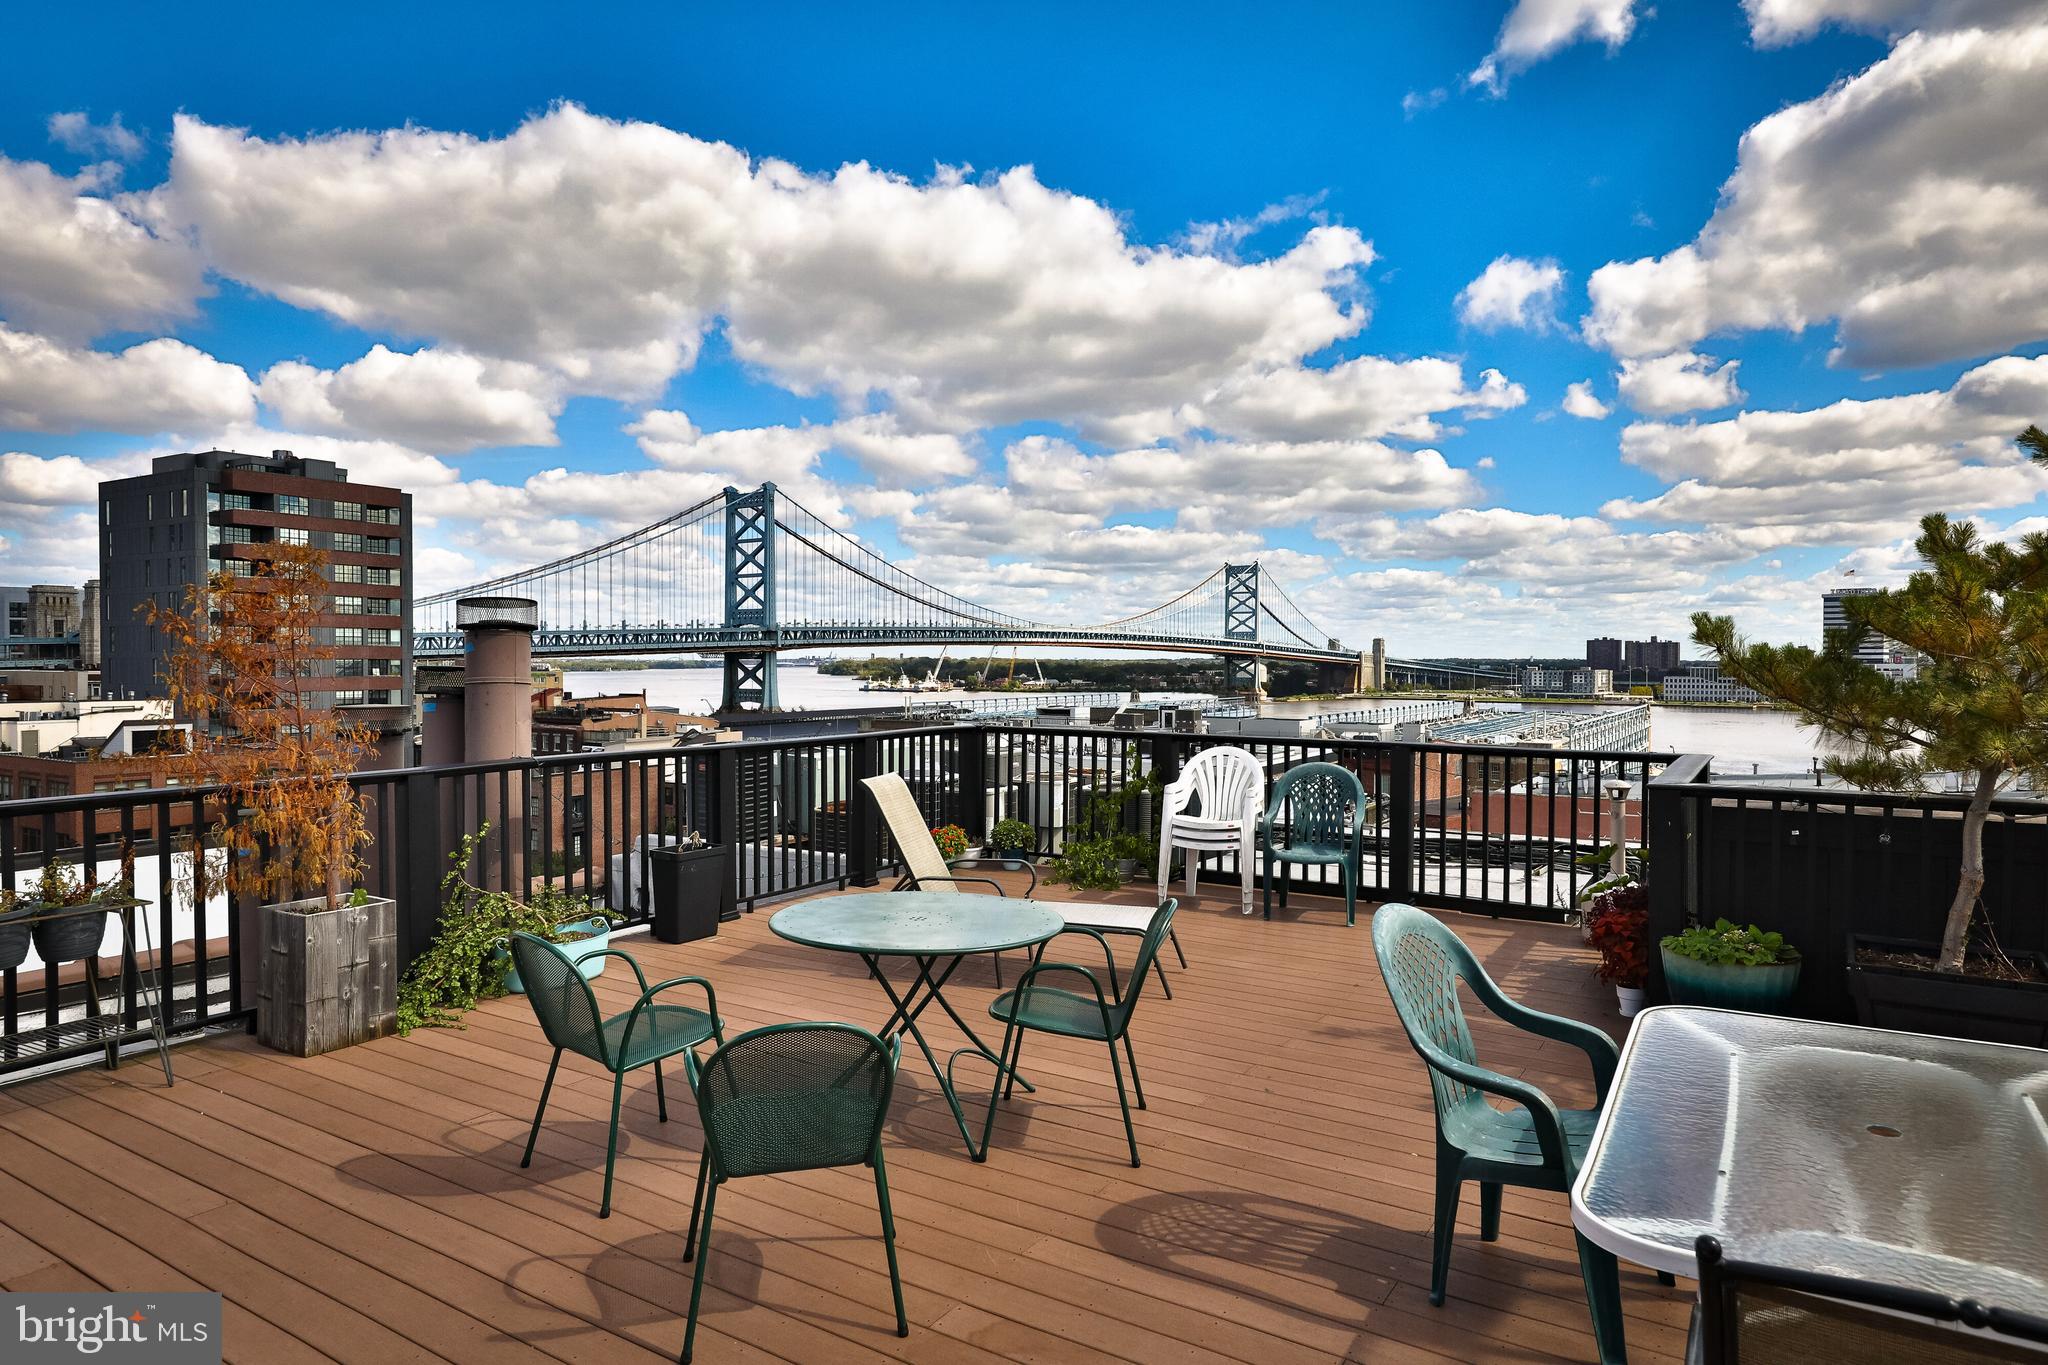 a view of a roof deck with furniture